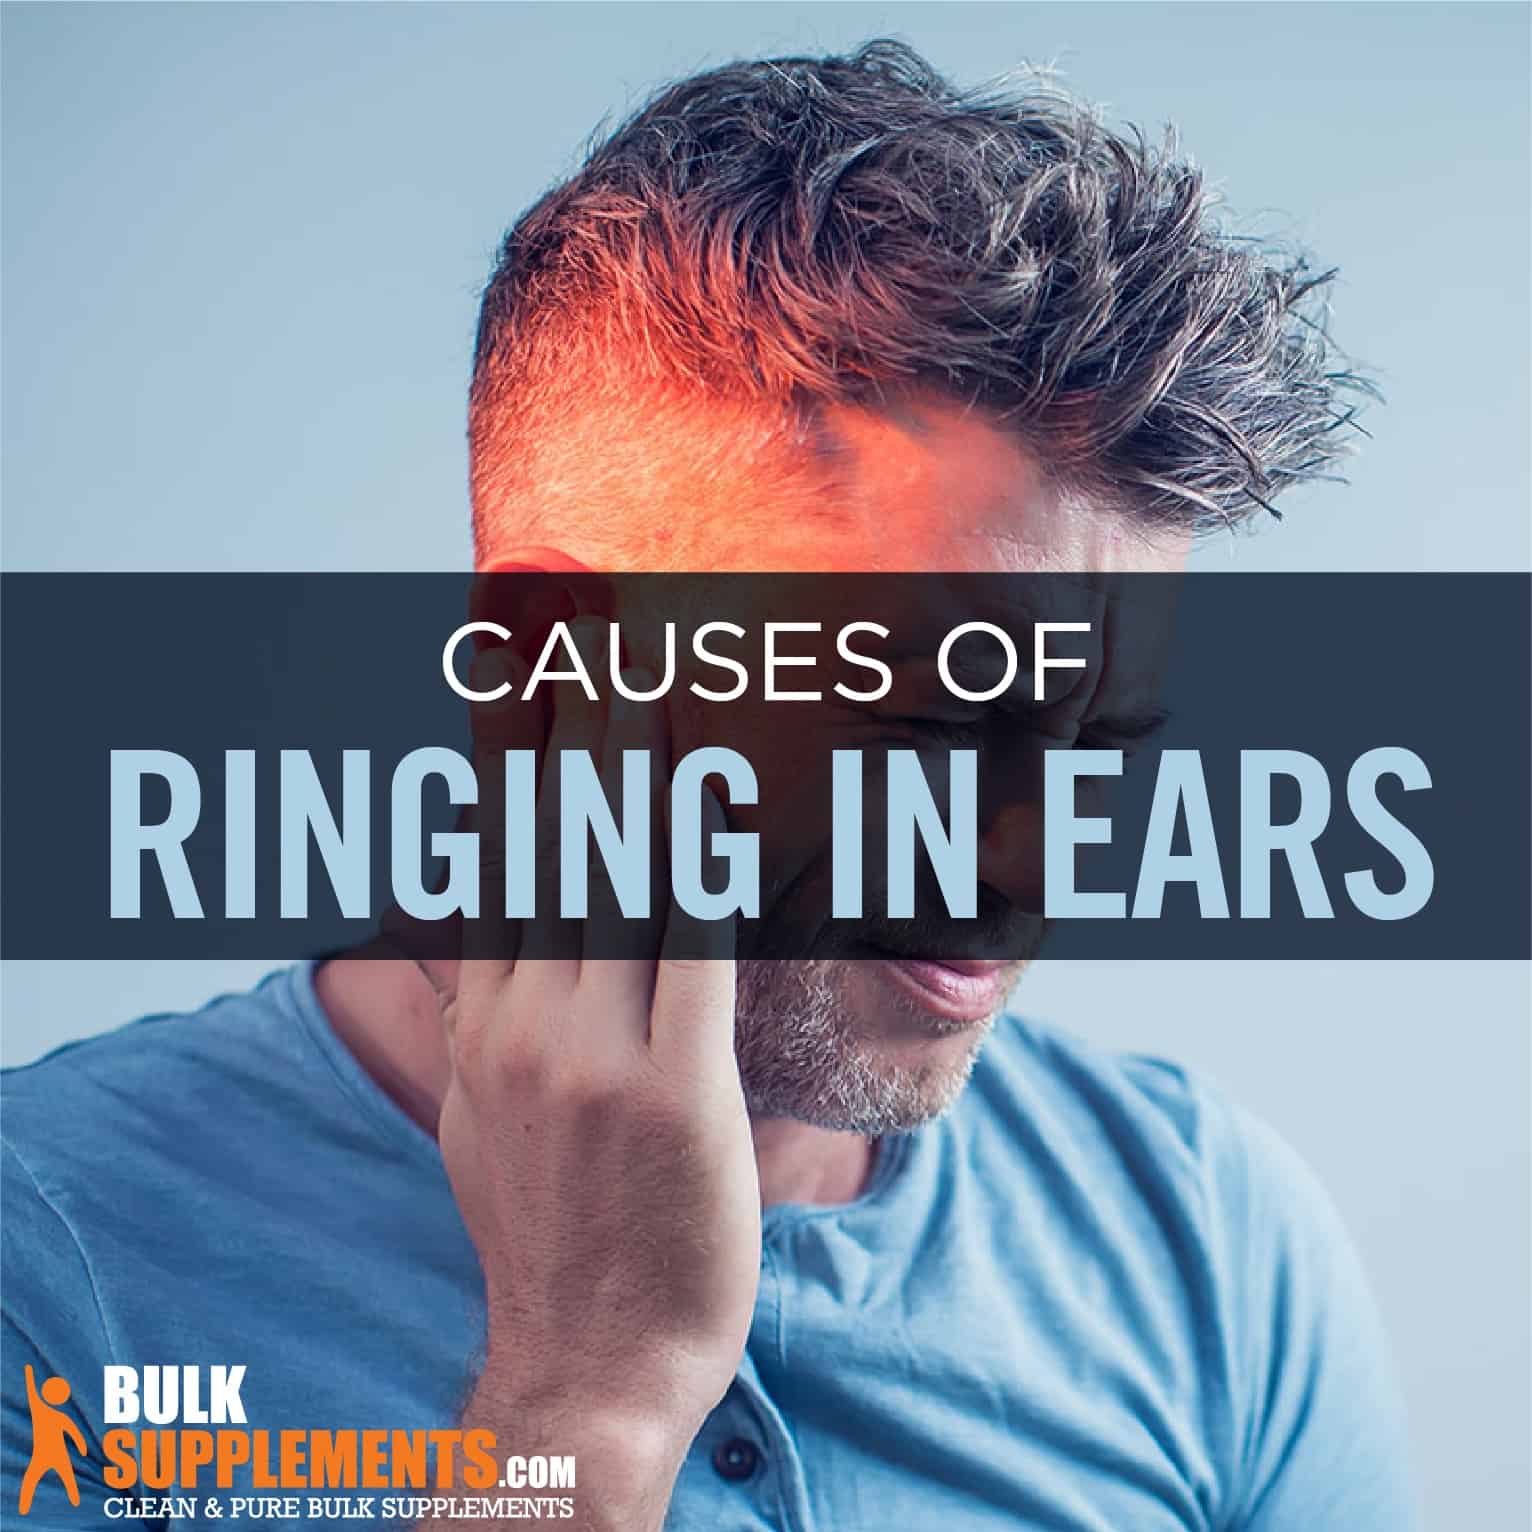 Hypothyroidism can cause hearing loss and tinnitus